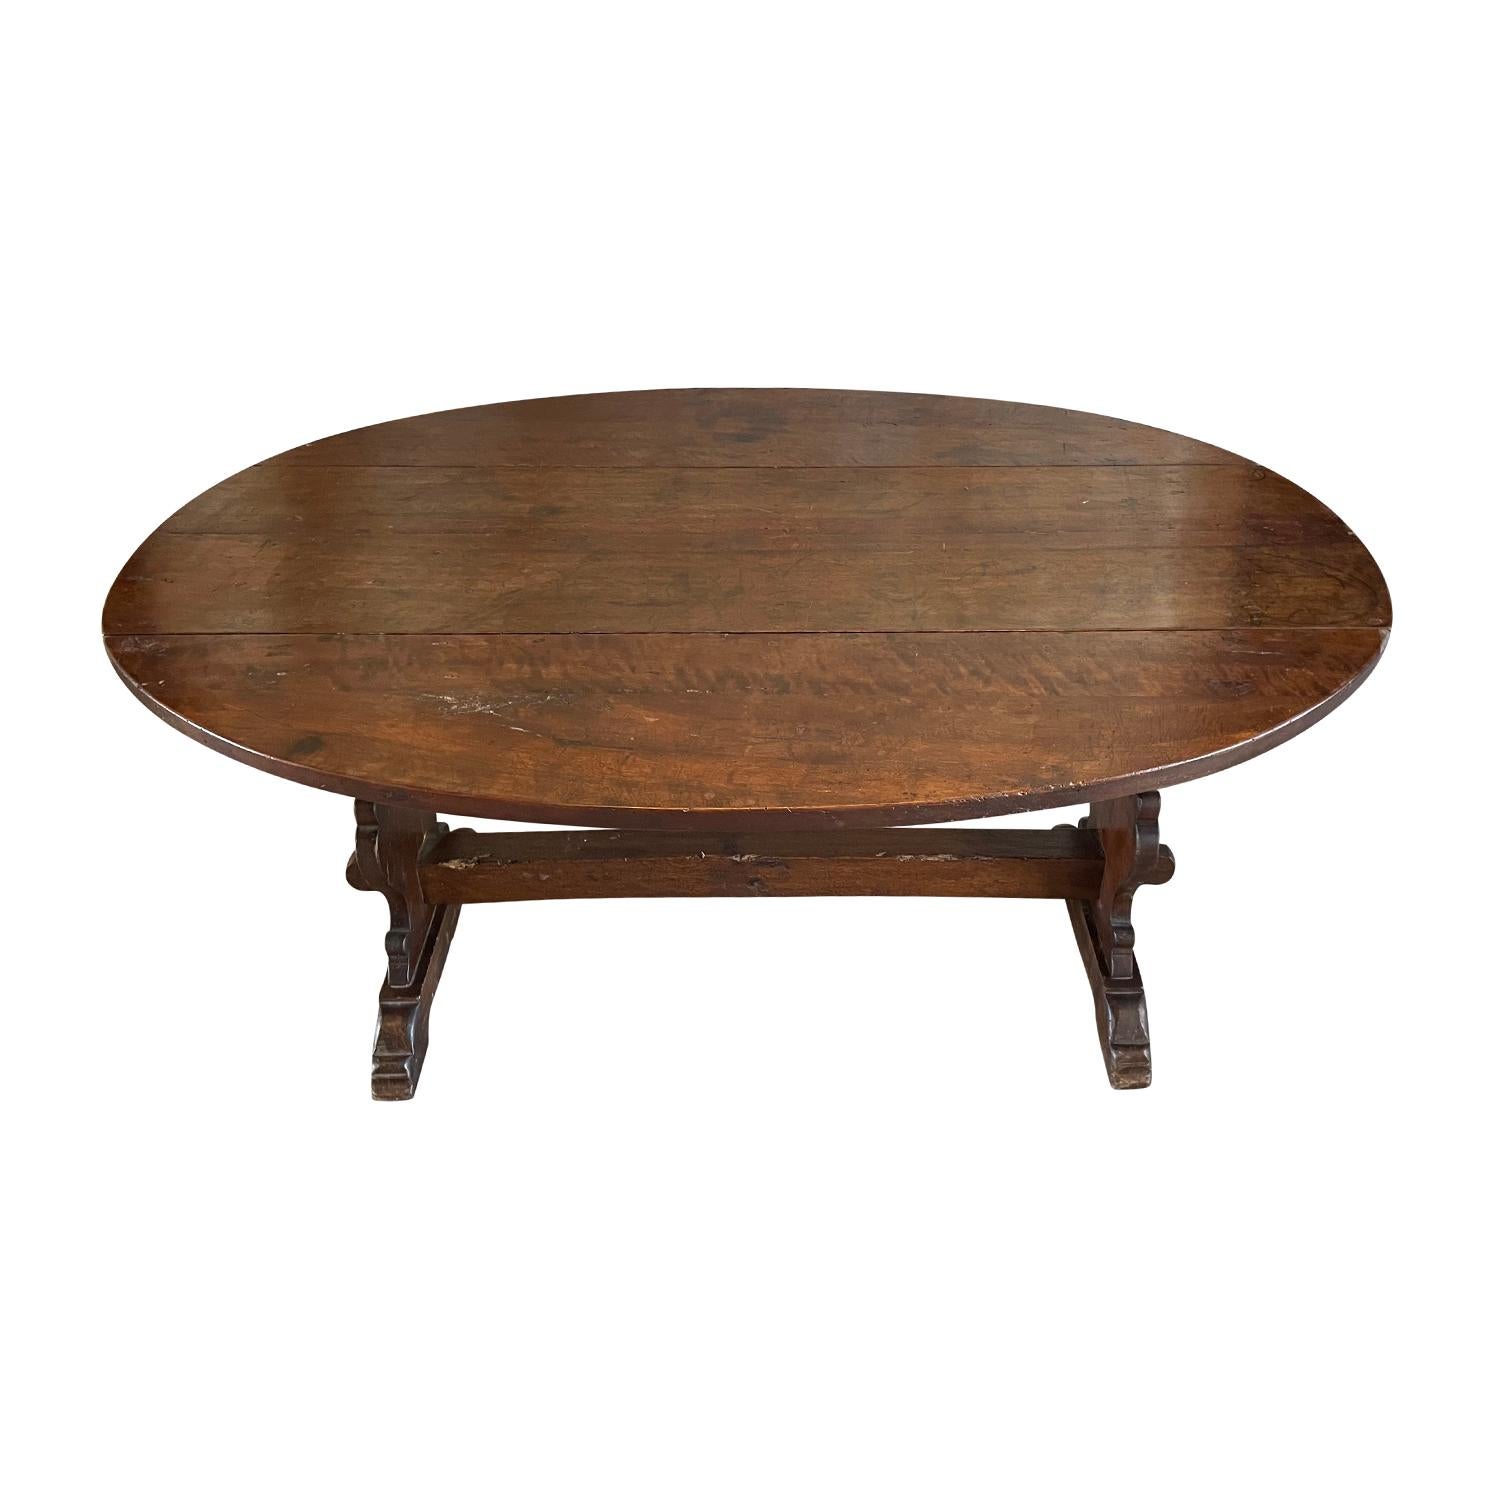 An antique Italian small oval dining table with hand waxed finish. This Tuscan table is made of hand crafted Walnut and supported by a substantial trestle design base, in good condition. The two sides of the dining room table are foldable. There is